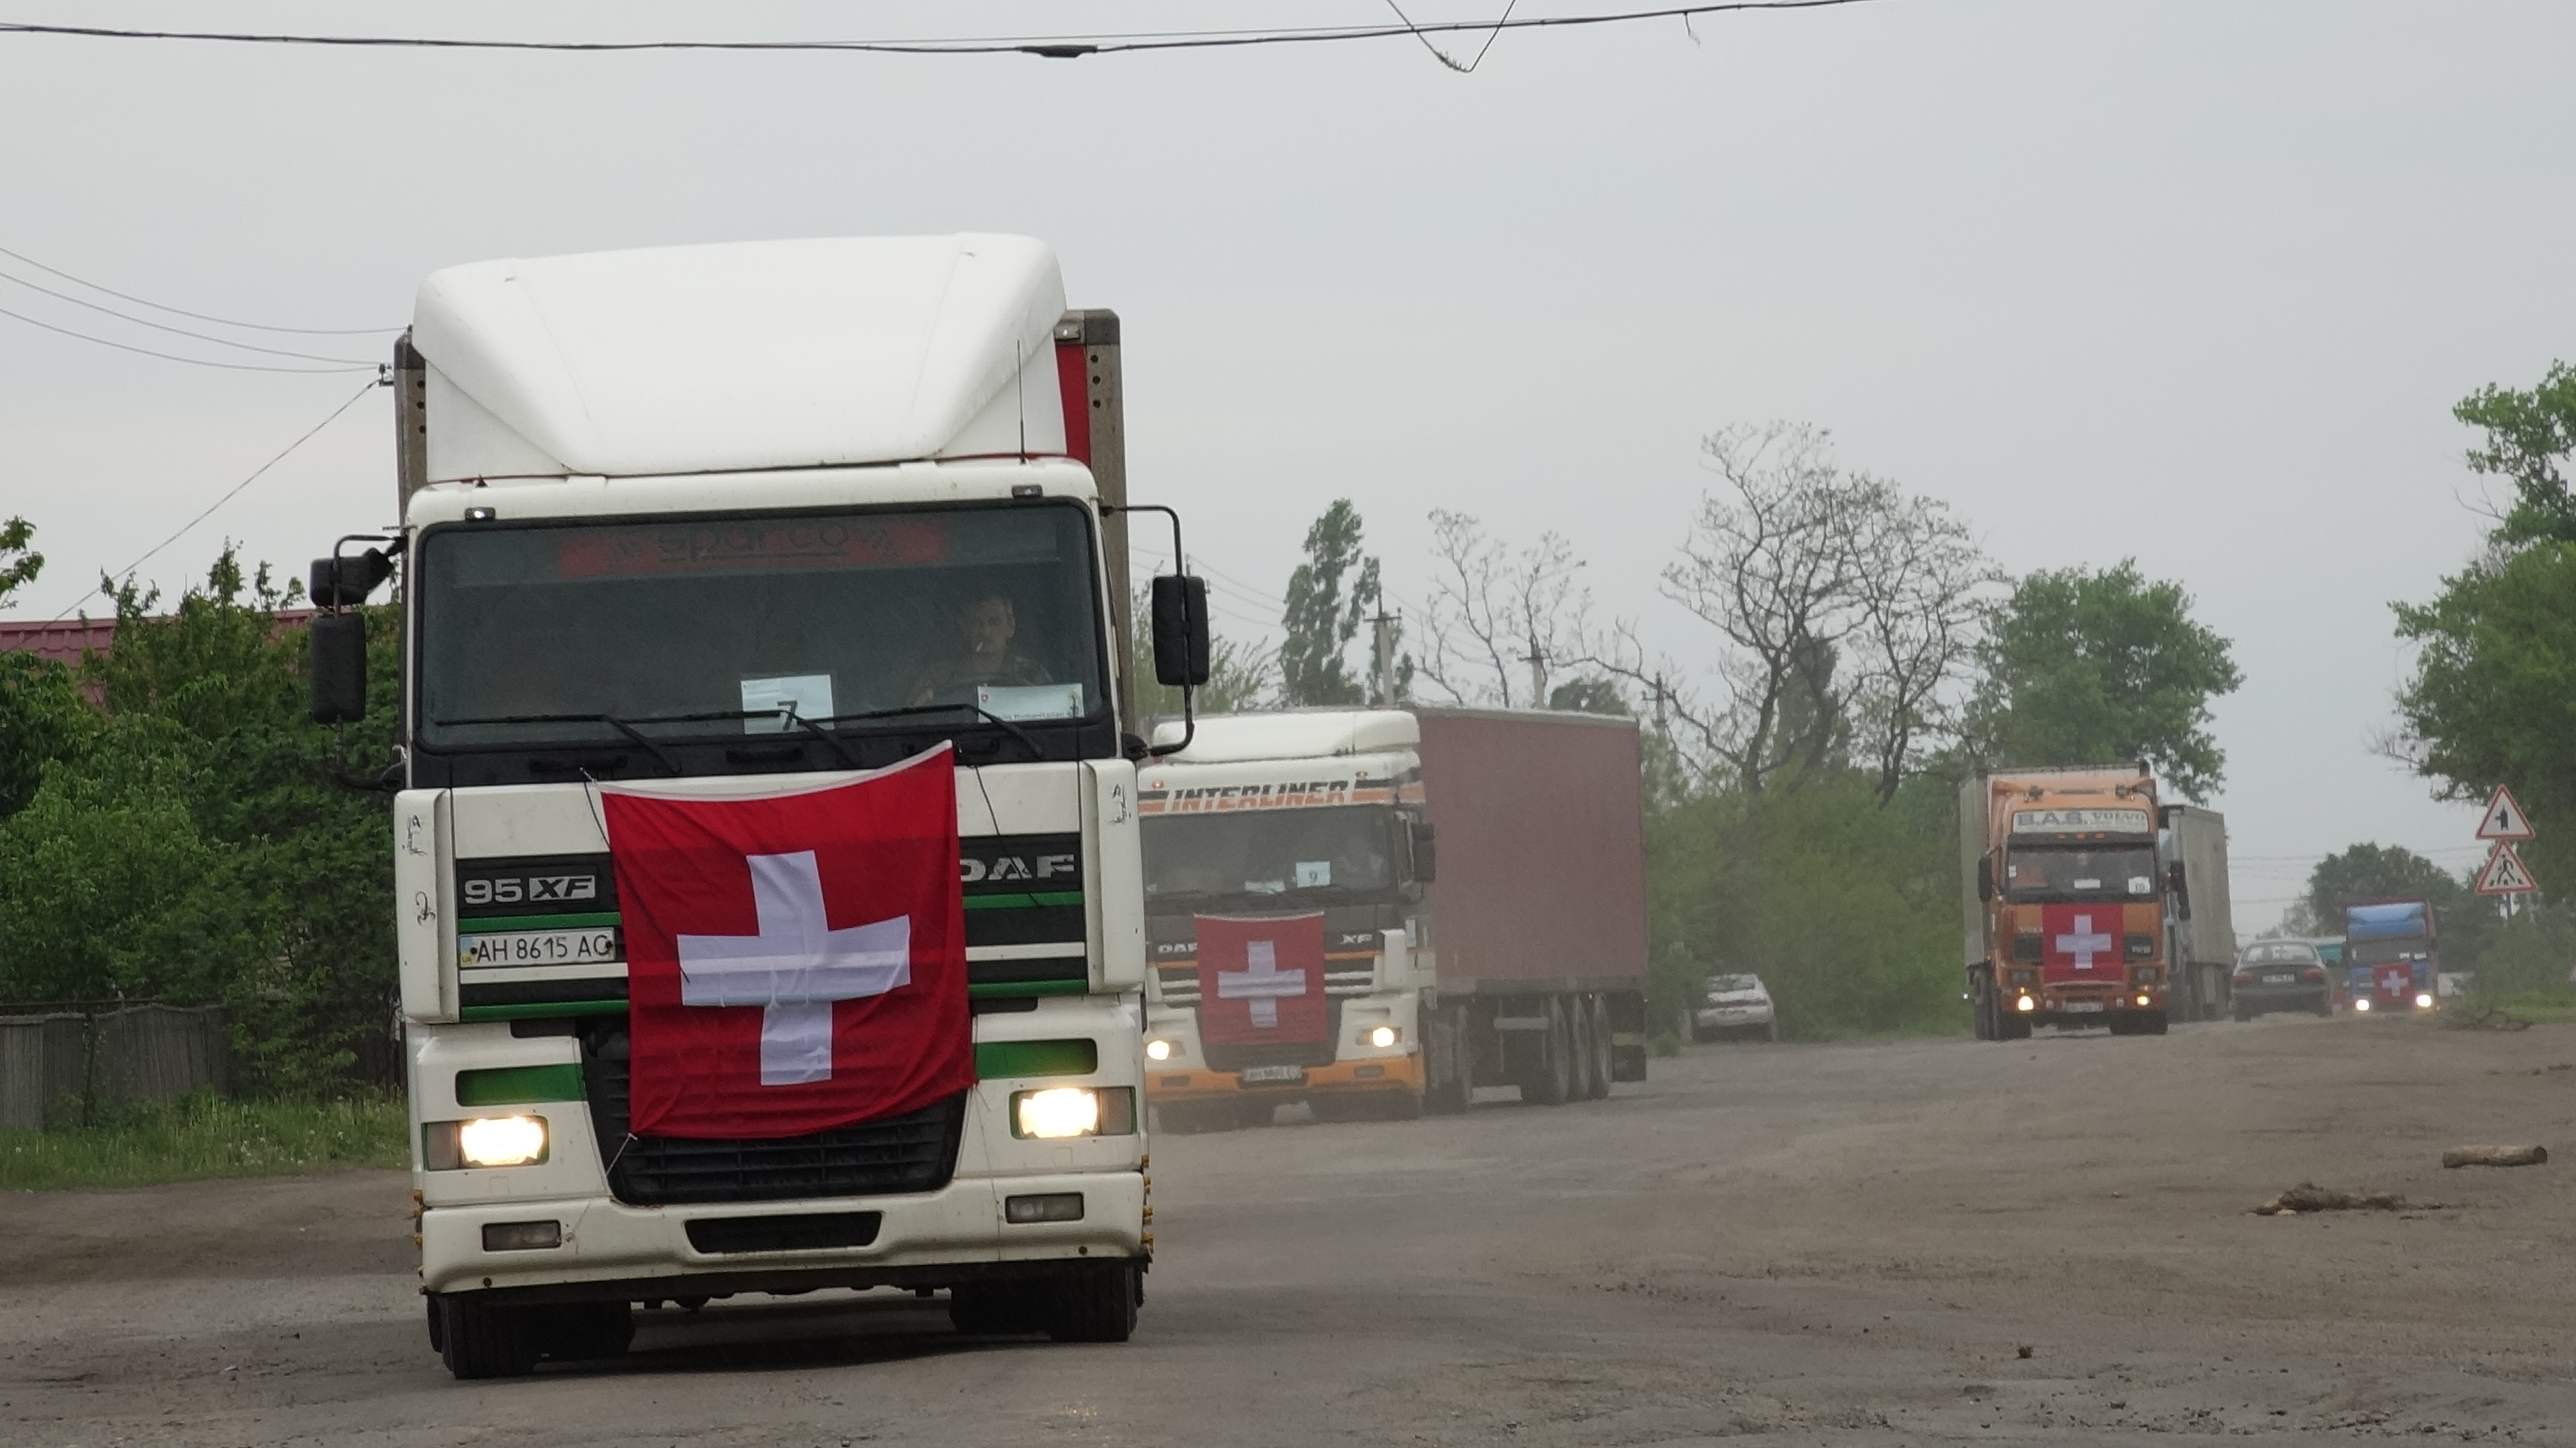 Swiss convoy to aid civilian population in eastern Ukraine reaches Donetsk. Switzerland sent a convoy carrying 300 tonnes of chemical water treatment products.